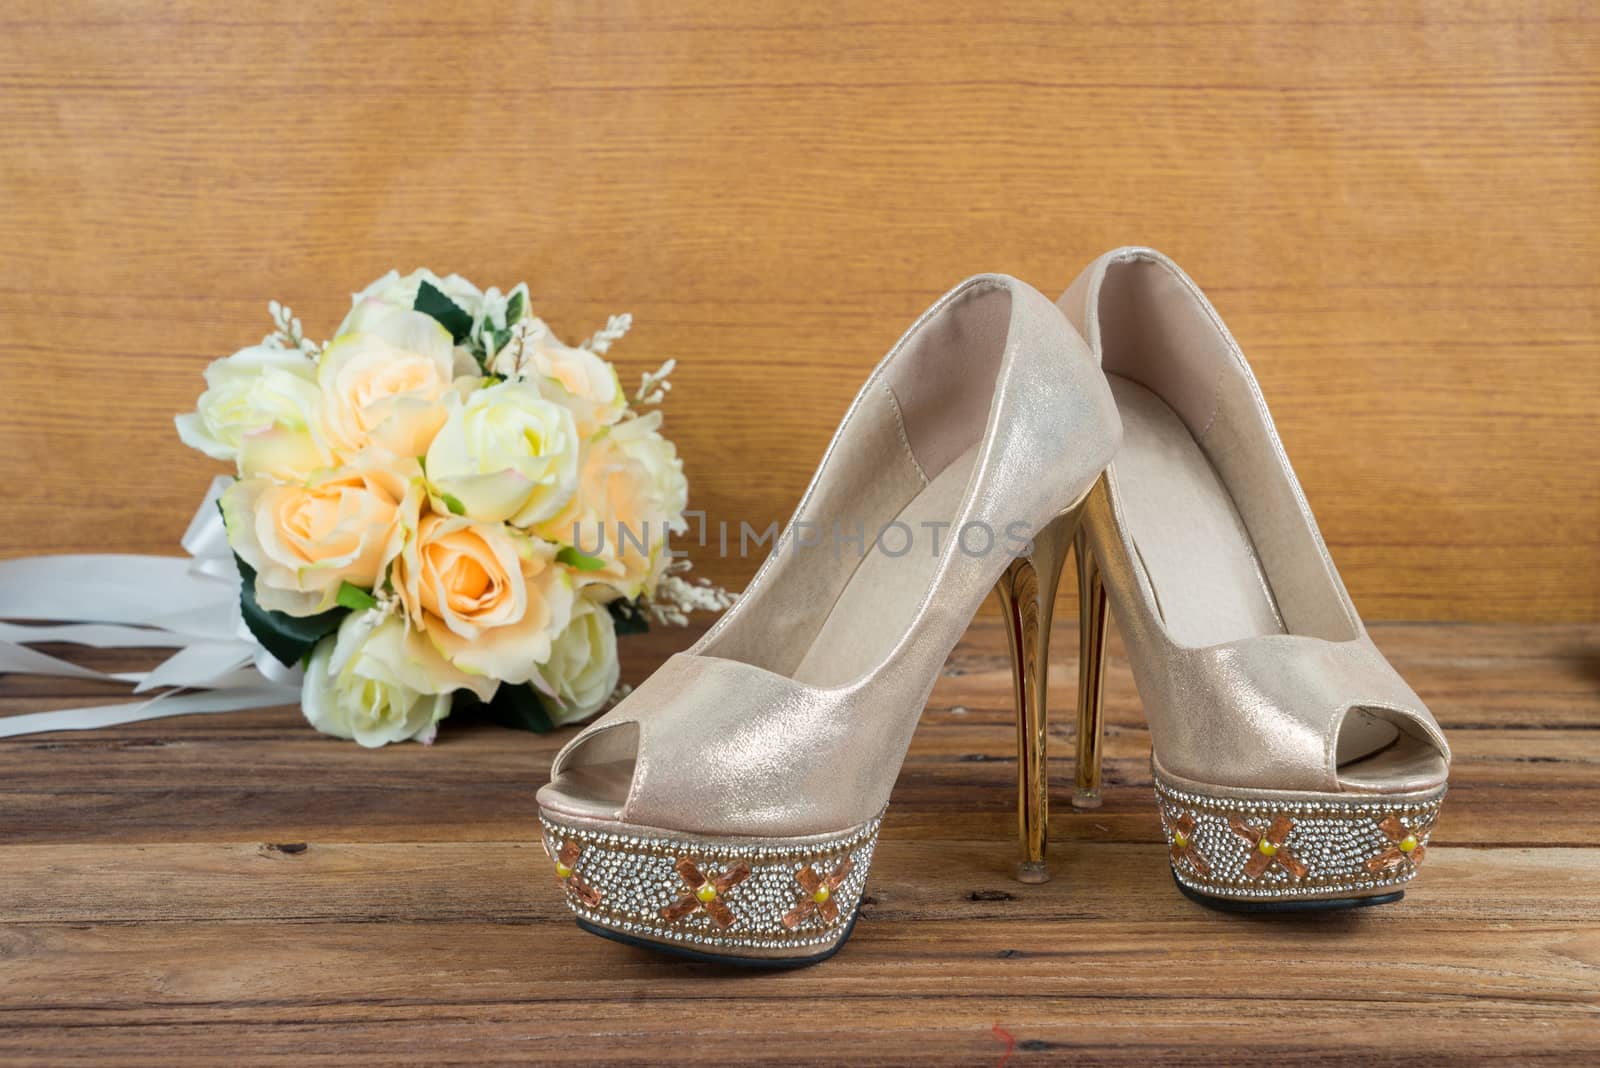 Wedding bouquet with bride's shoes on wood background by iamway